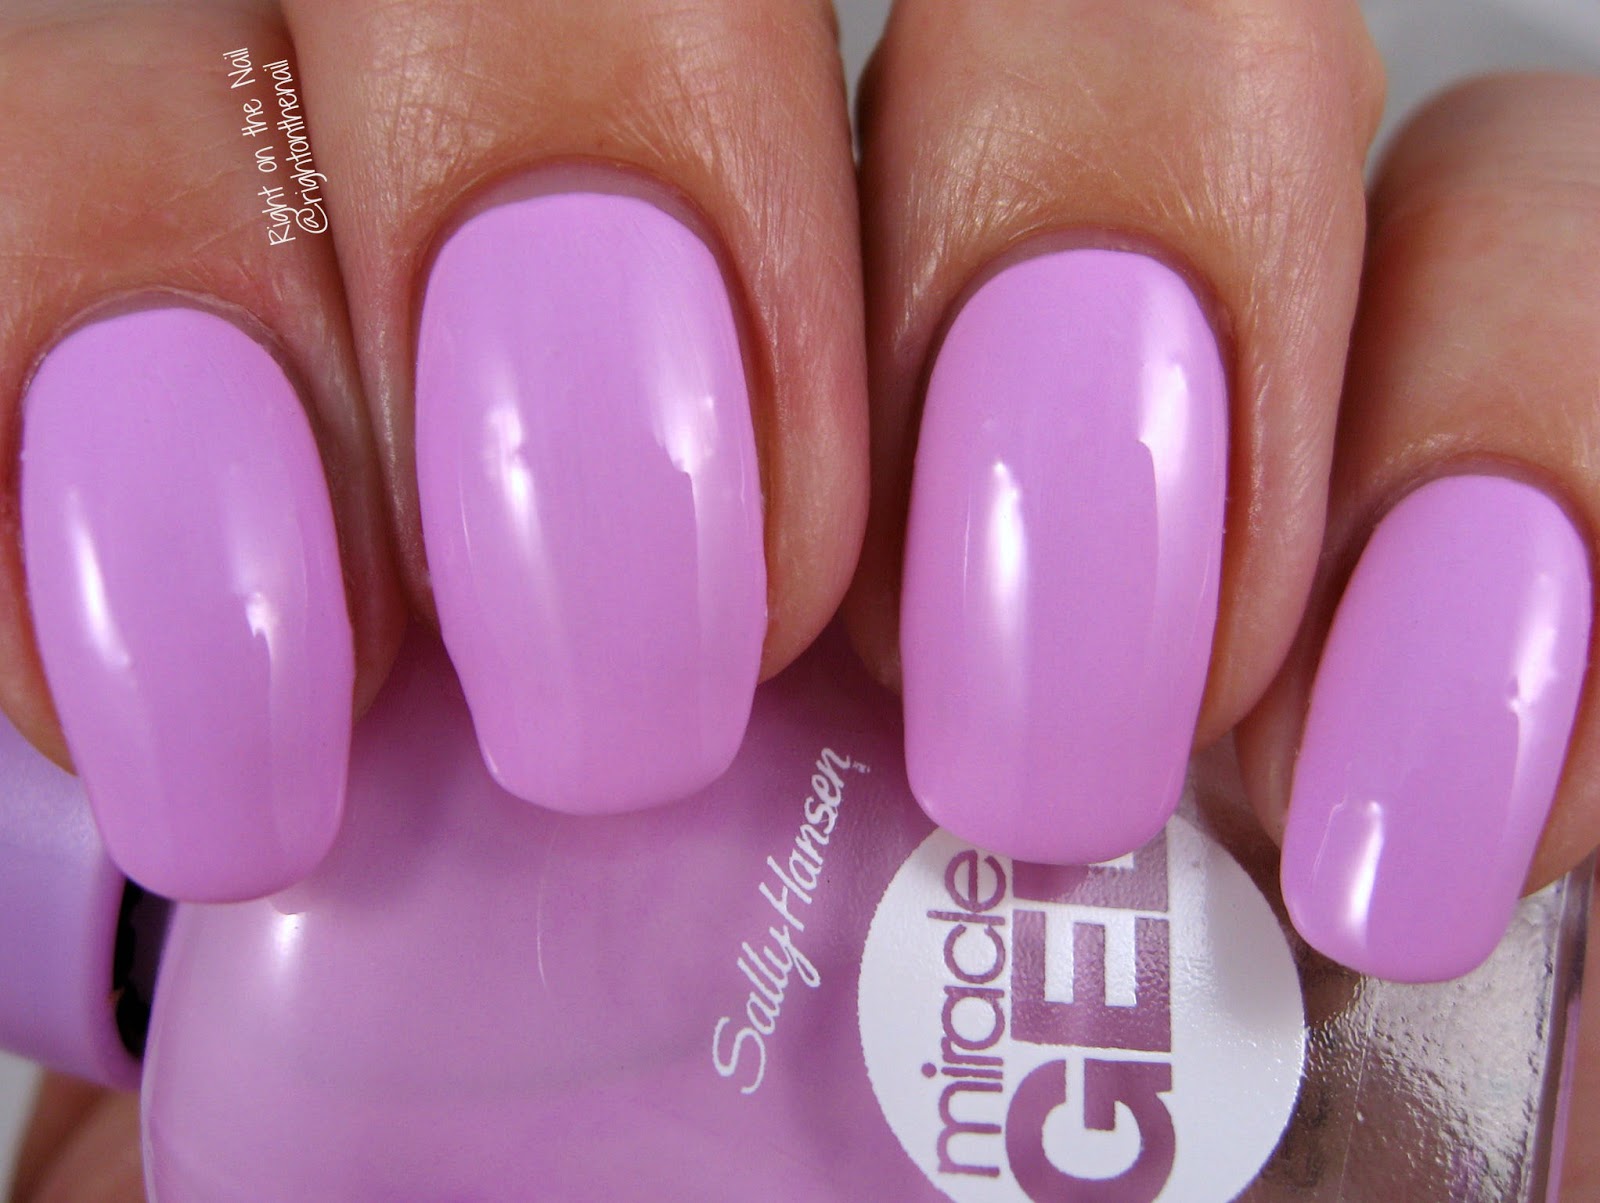 3. Sally Hansen Miracle Gel in "Orchid-ing Aside" - wide 8